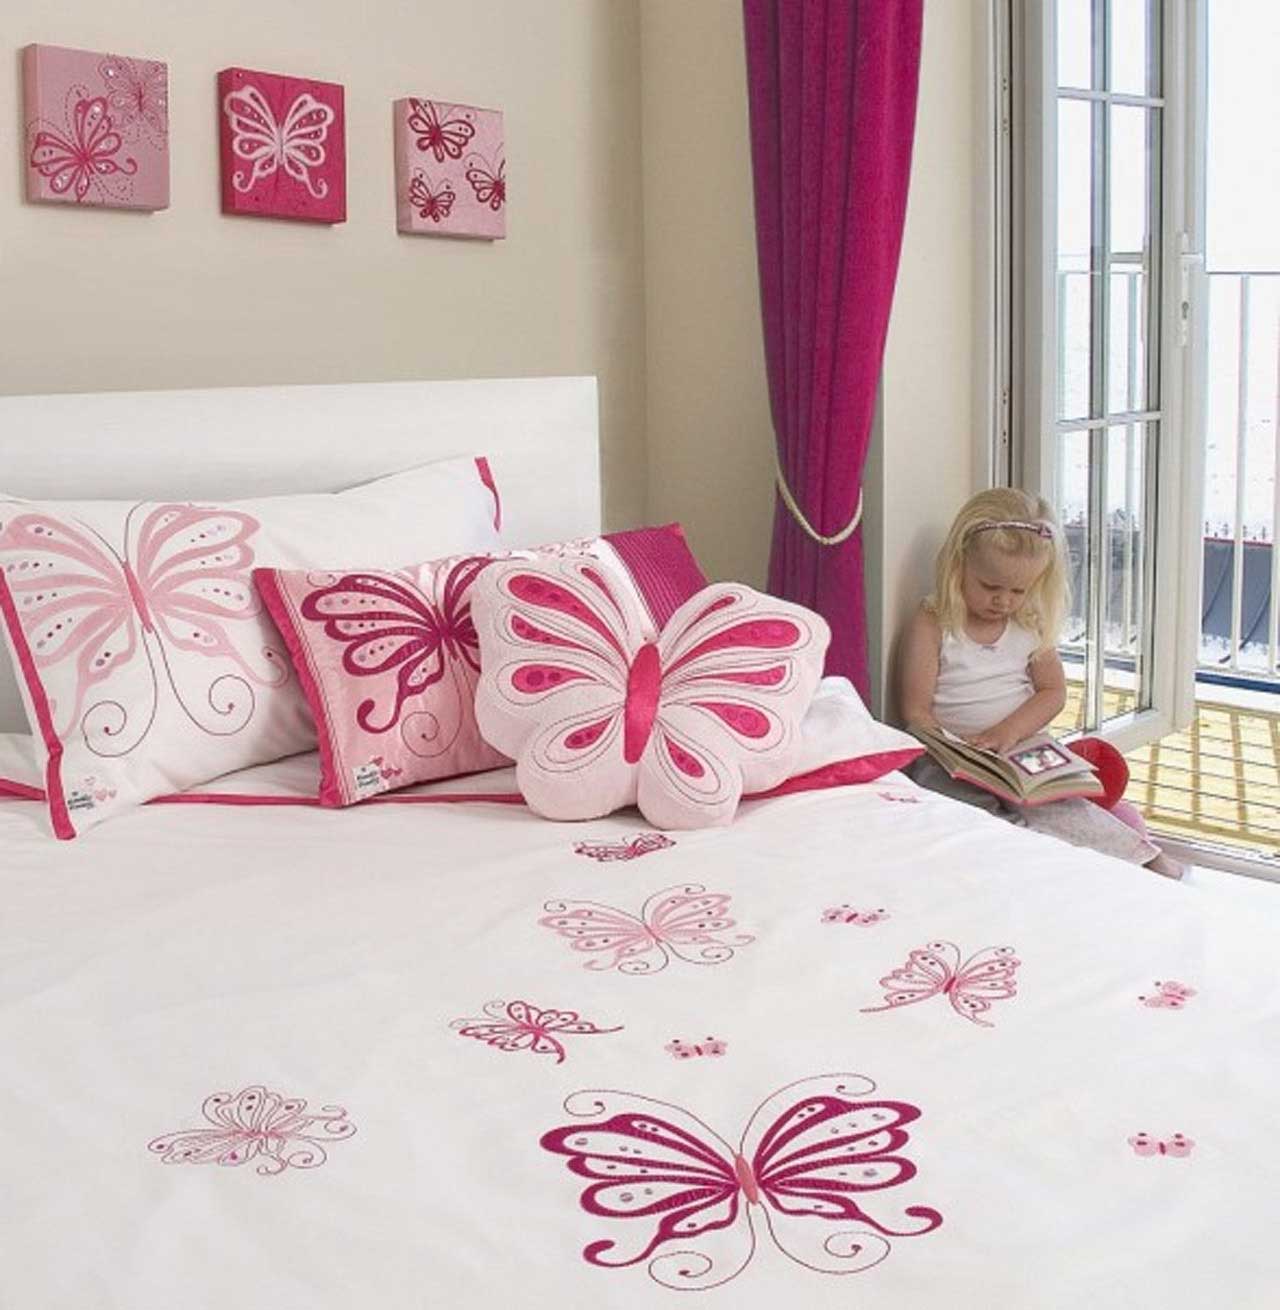 Charming Kids Room Decor For Girl With Beautiful Spring Butterfly Bed Kids Room Ideas Also Interesting Accessories For Teenage Girl Room Kids Room Design